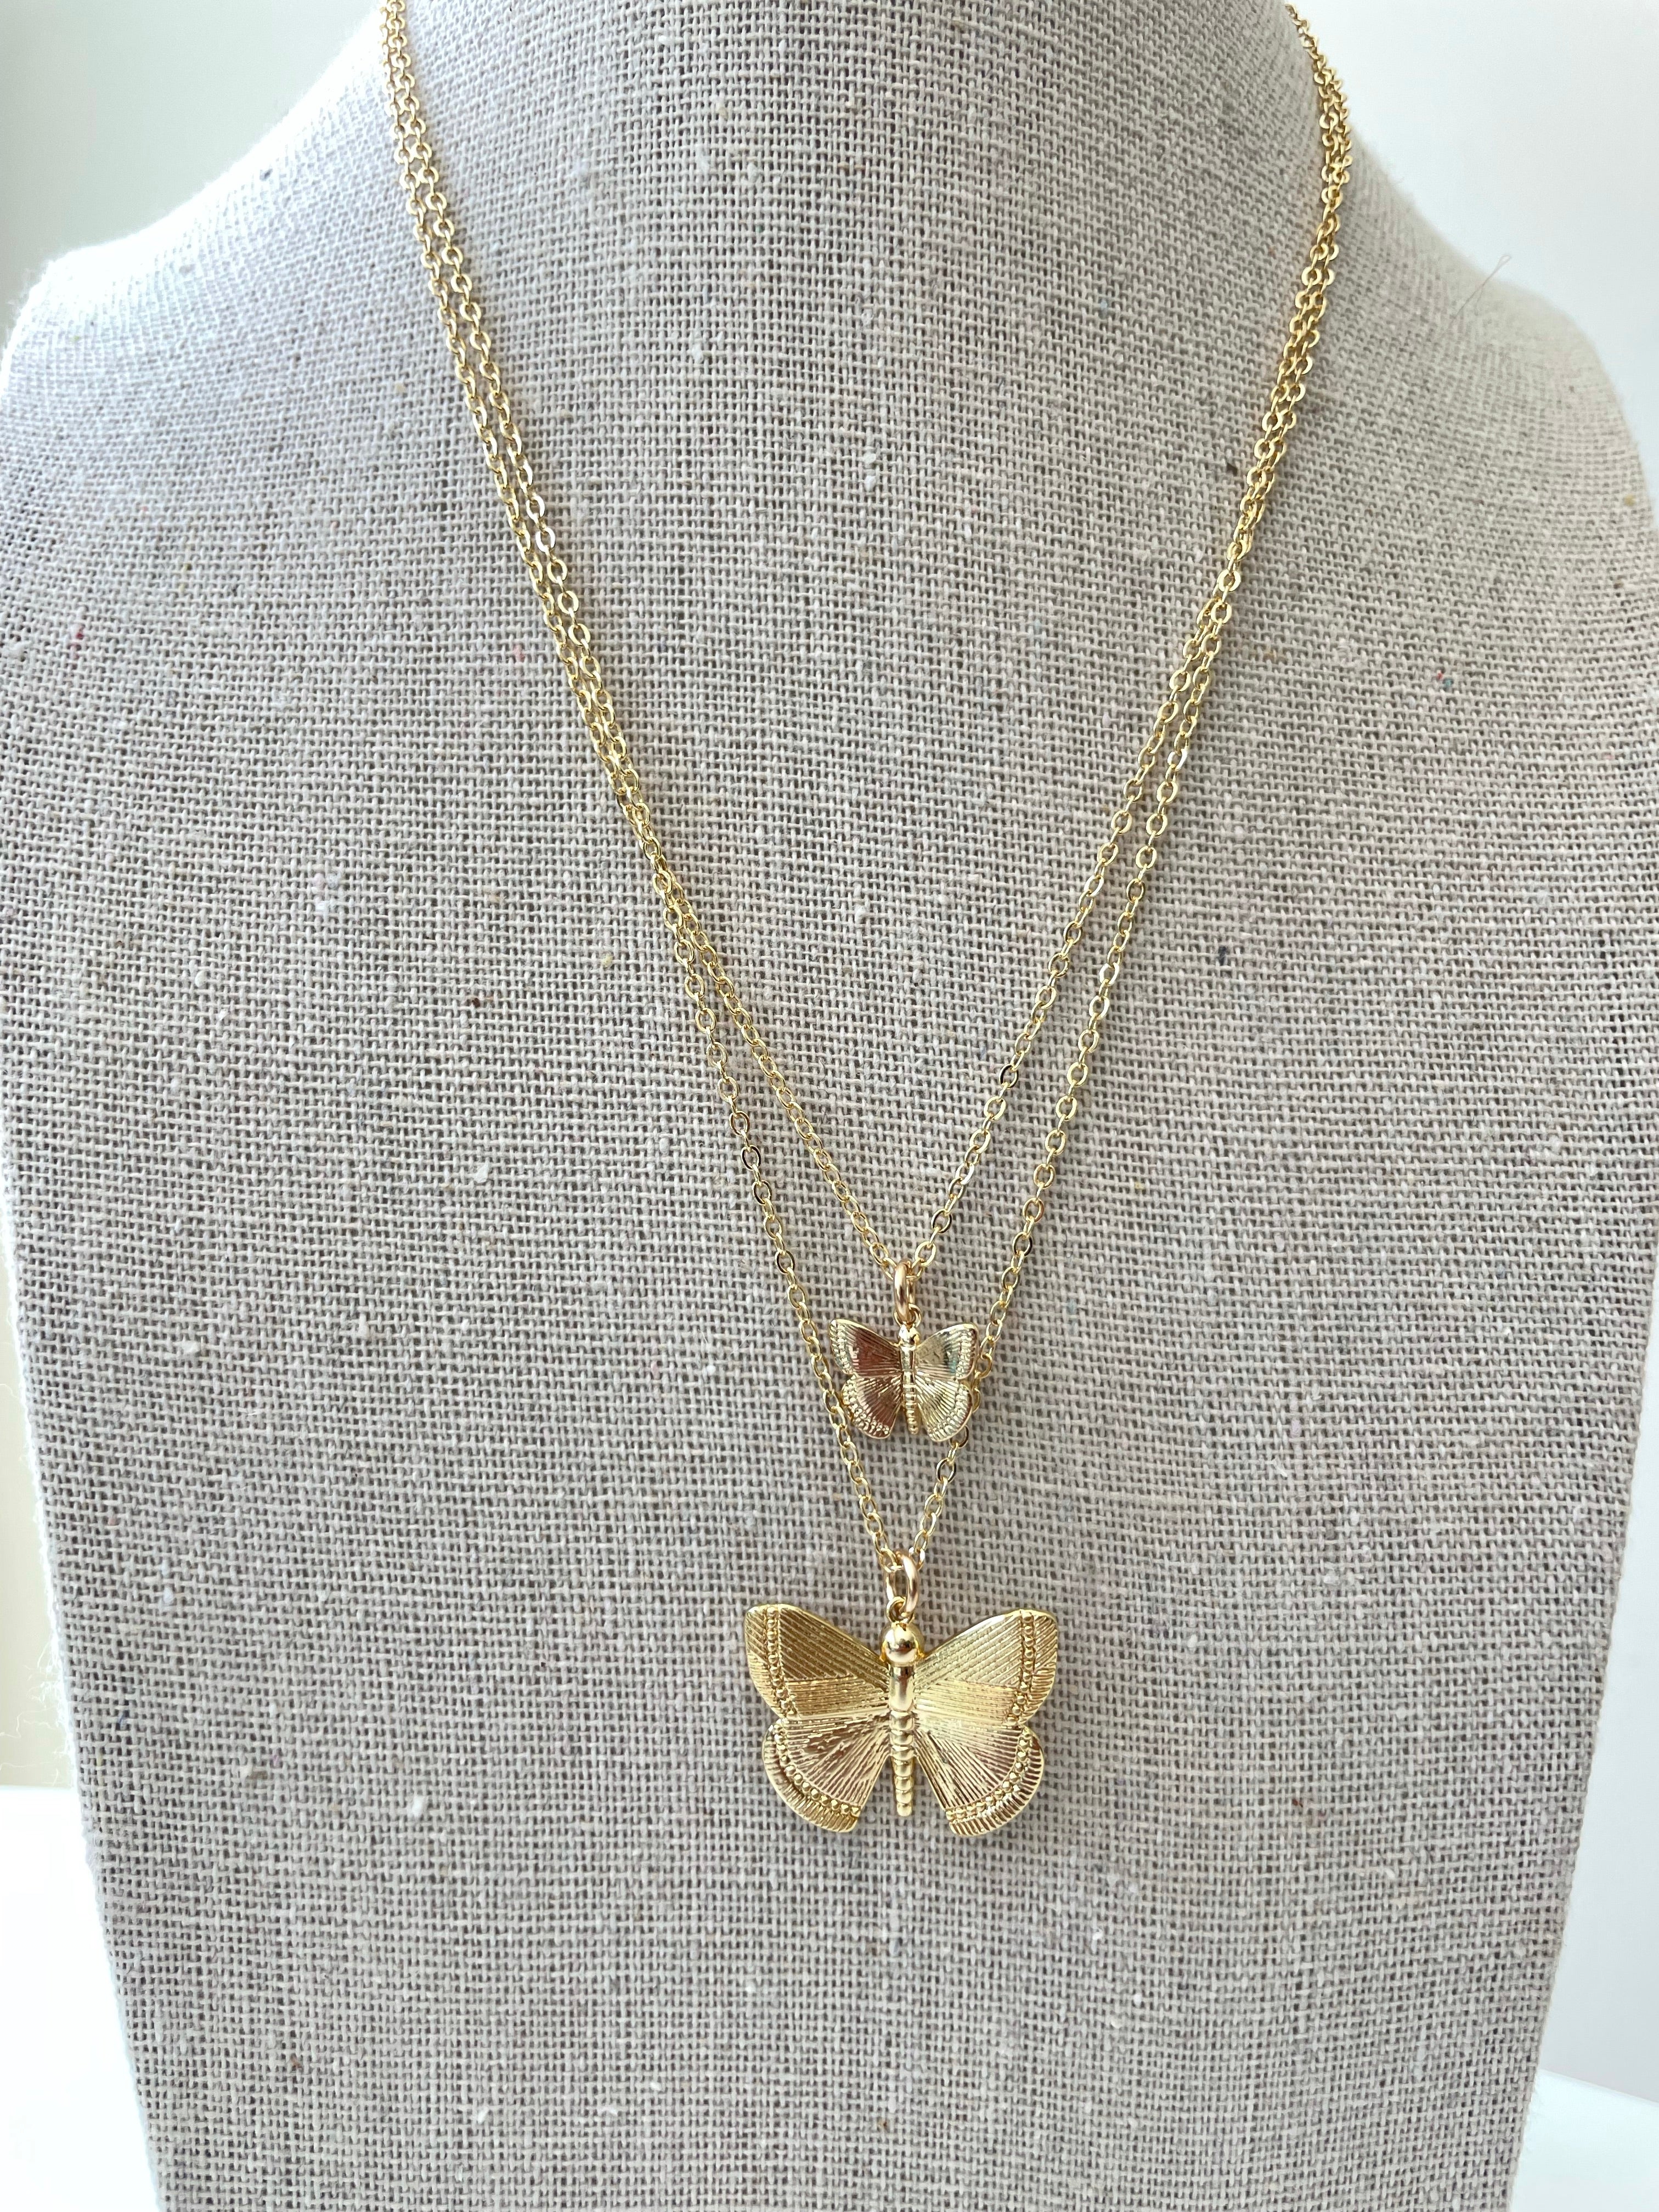 Butterfly Charm Necklace, Small